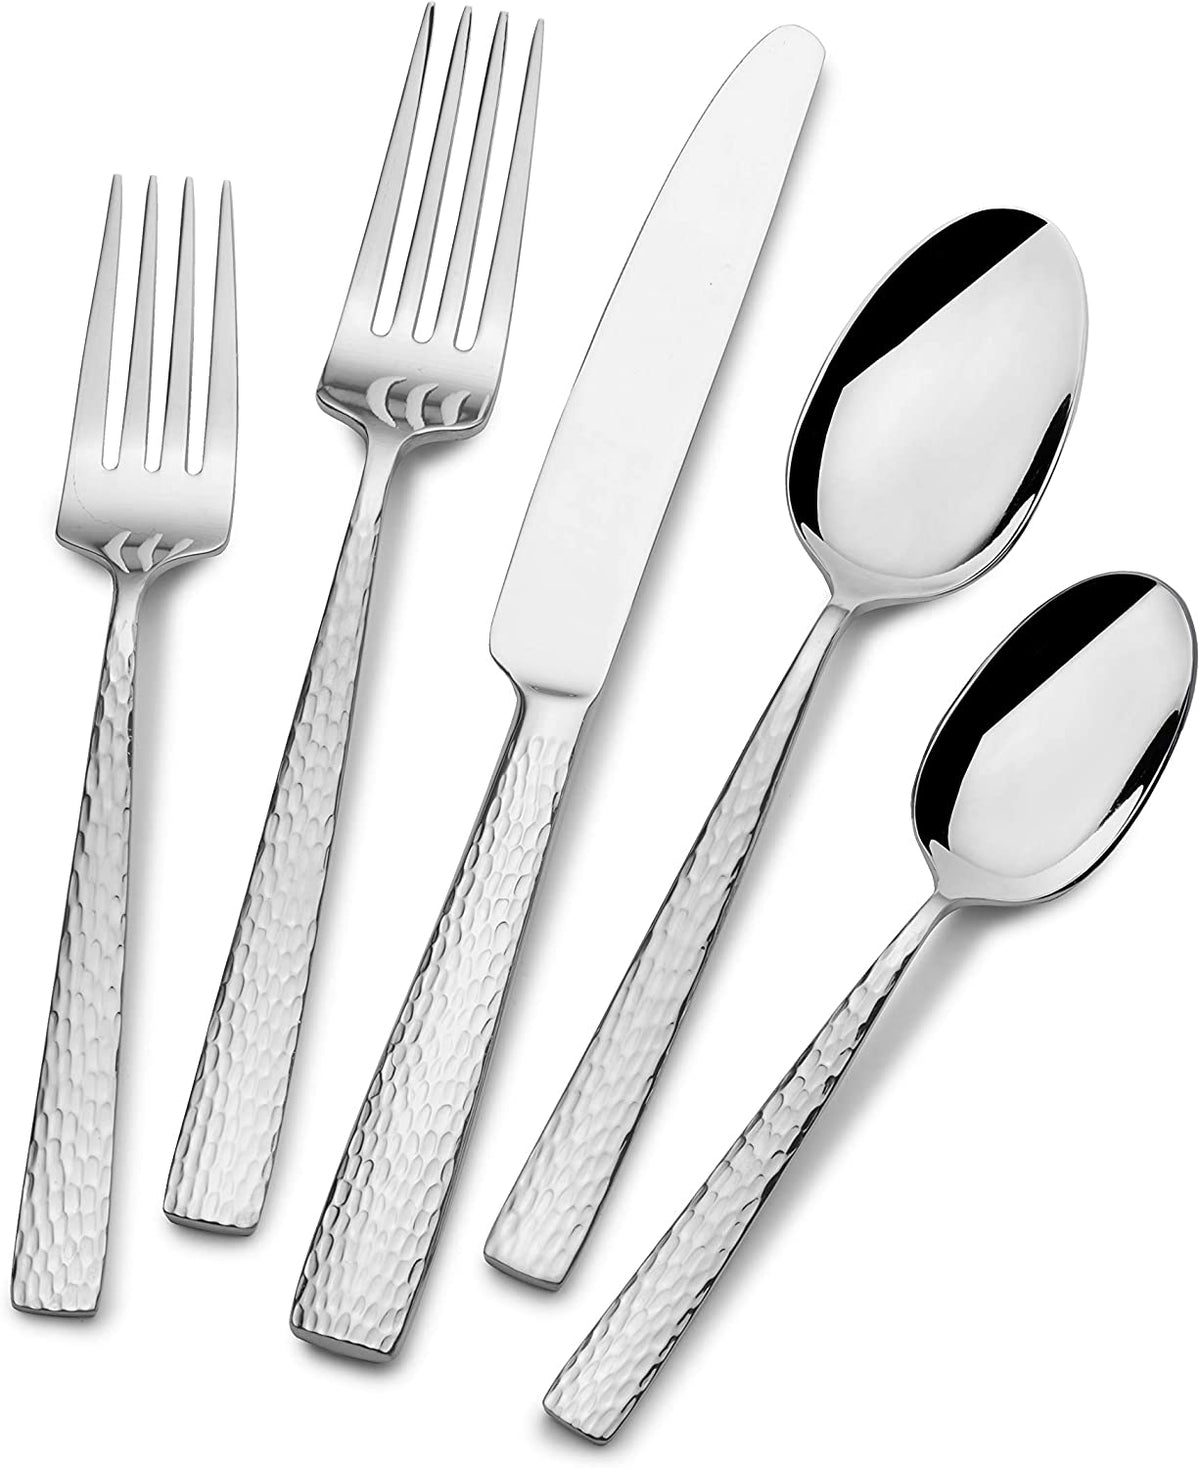 Mikasa Oliver Gleam 65-Piece 18/10 Stainless Steel Flatware Set with Serveware, Service for 12